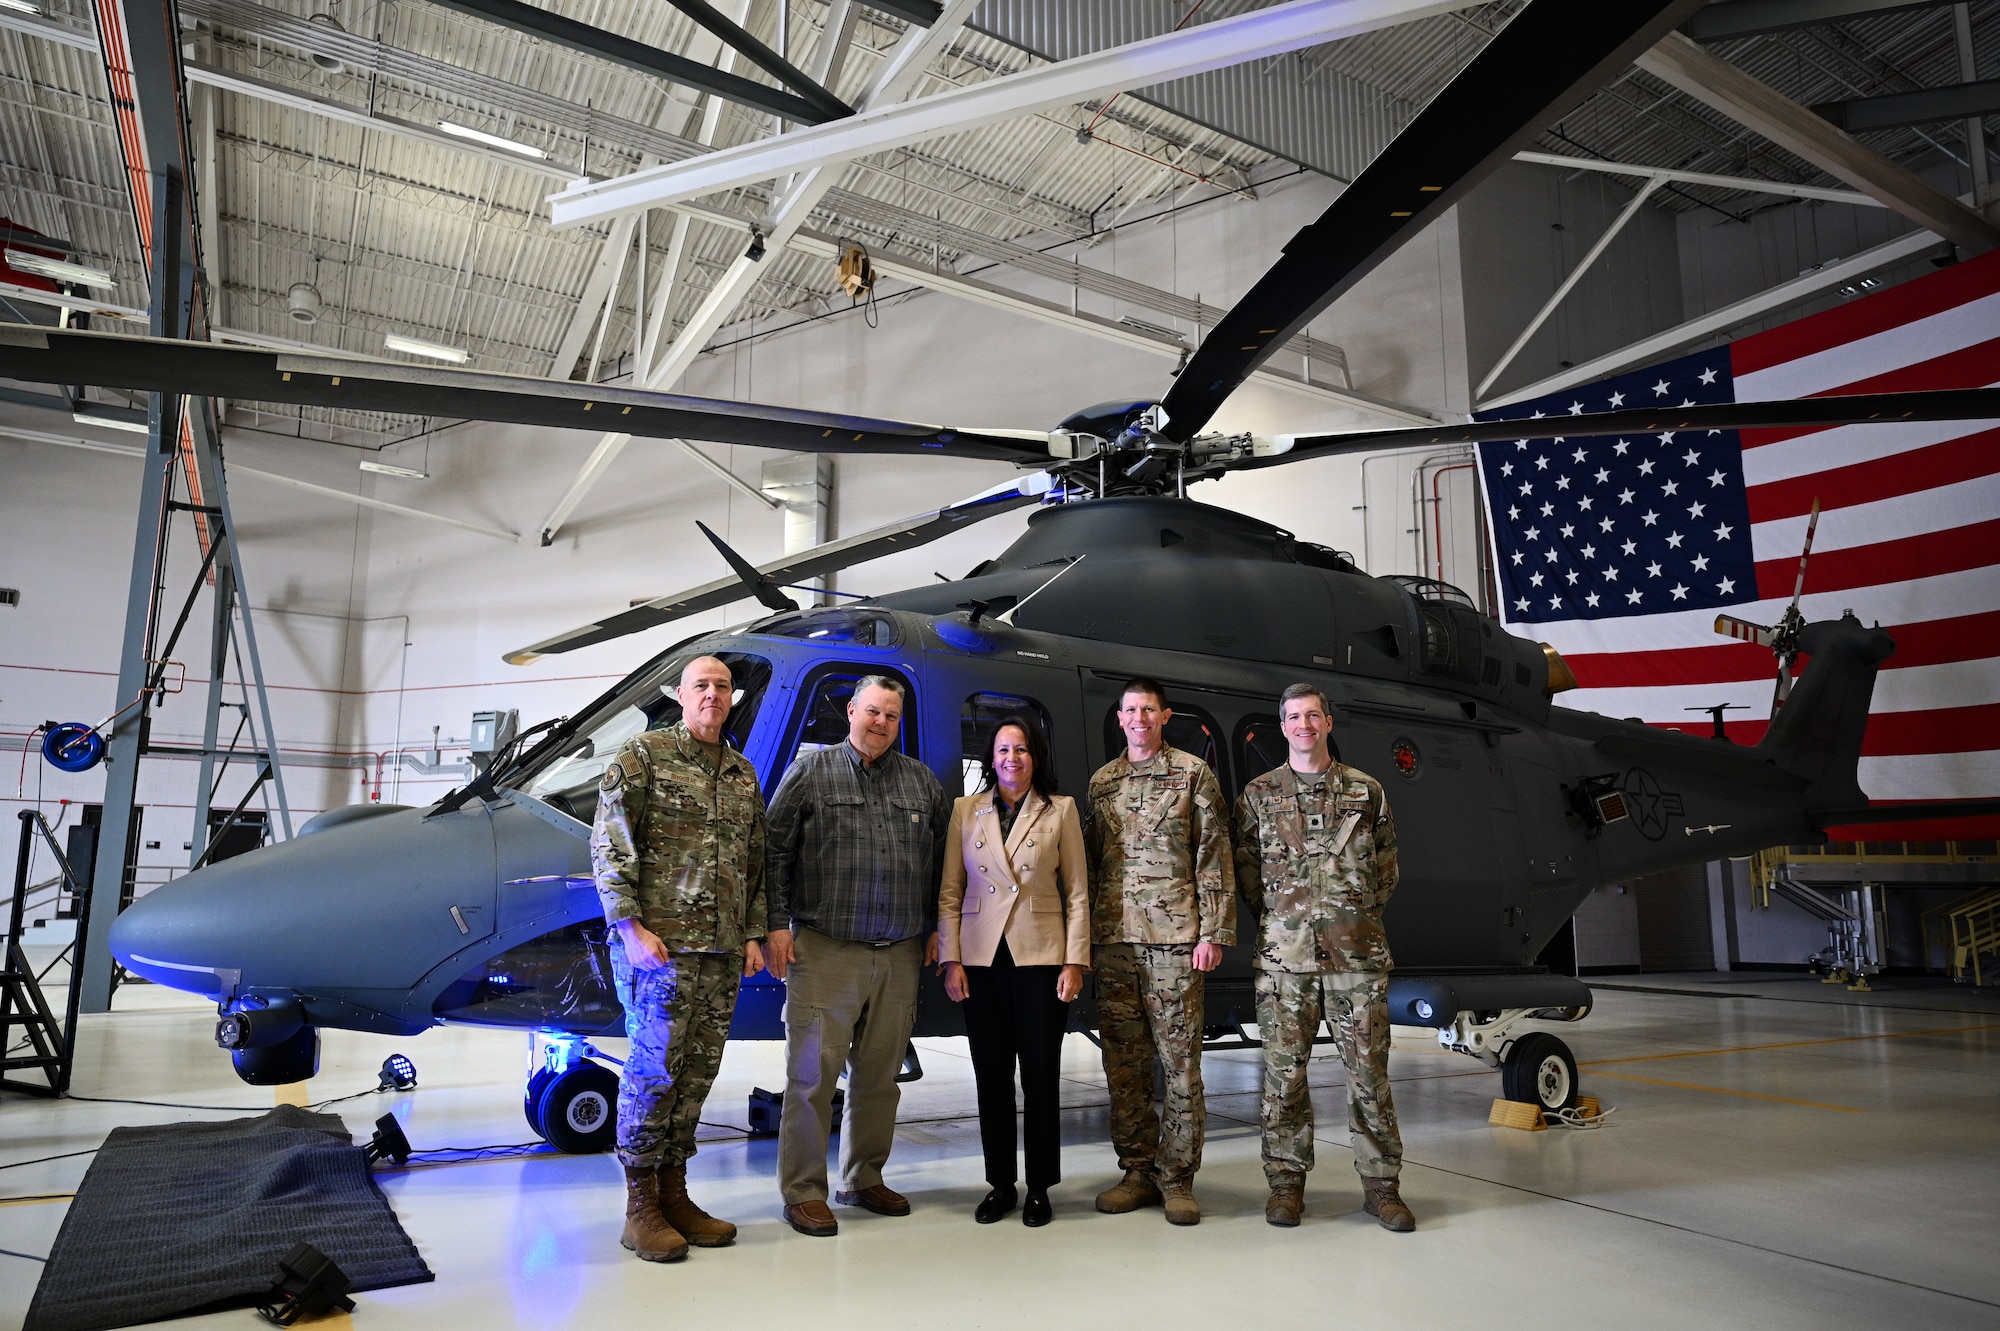 A group of five adults, three in military uniform and two in business clothes, stand beside each other and smile toward the camera. Behind them is a grey helicopter and large American flag.